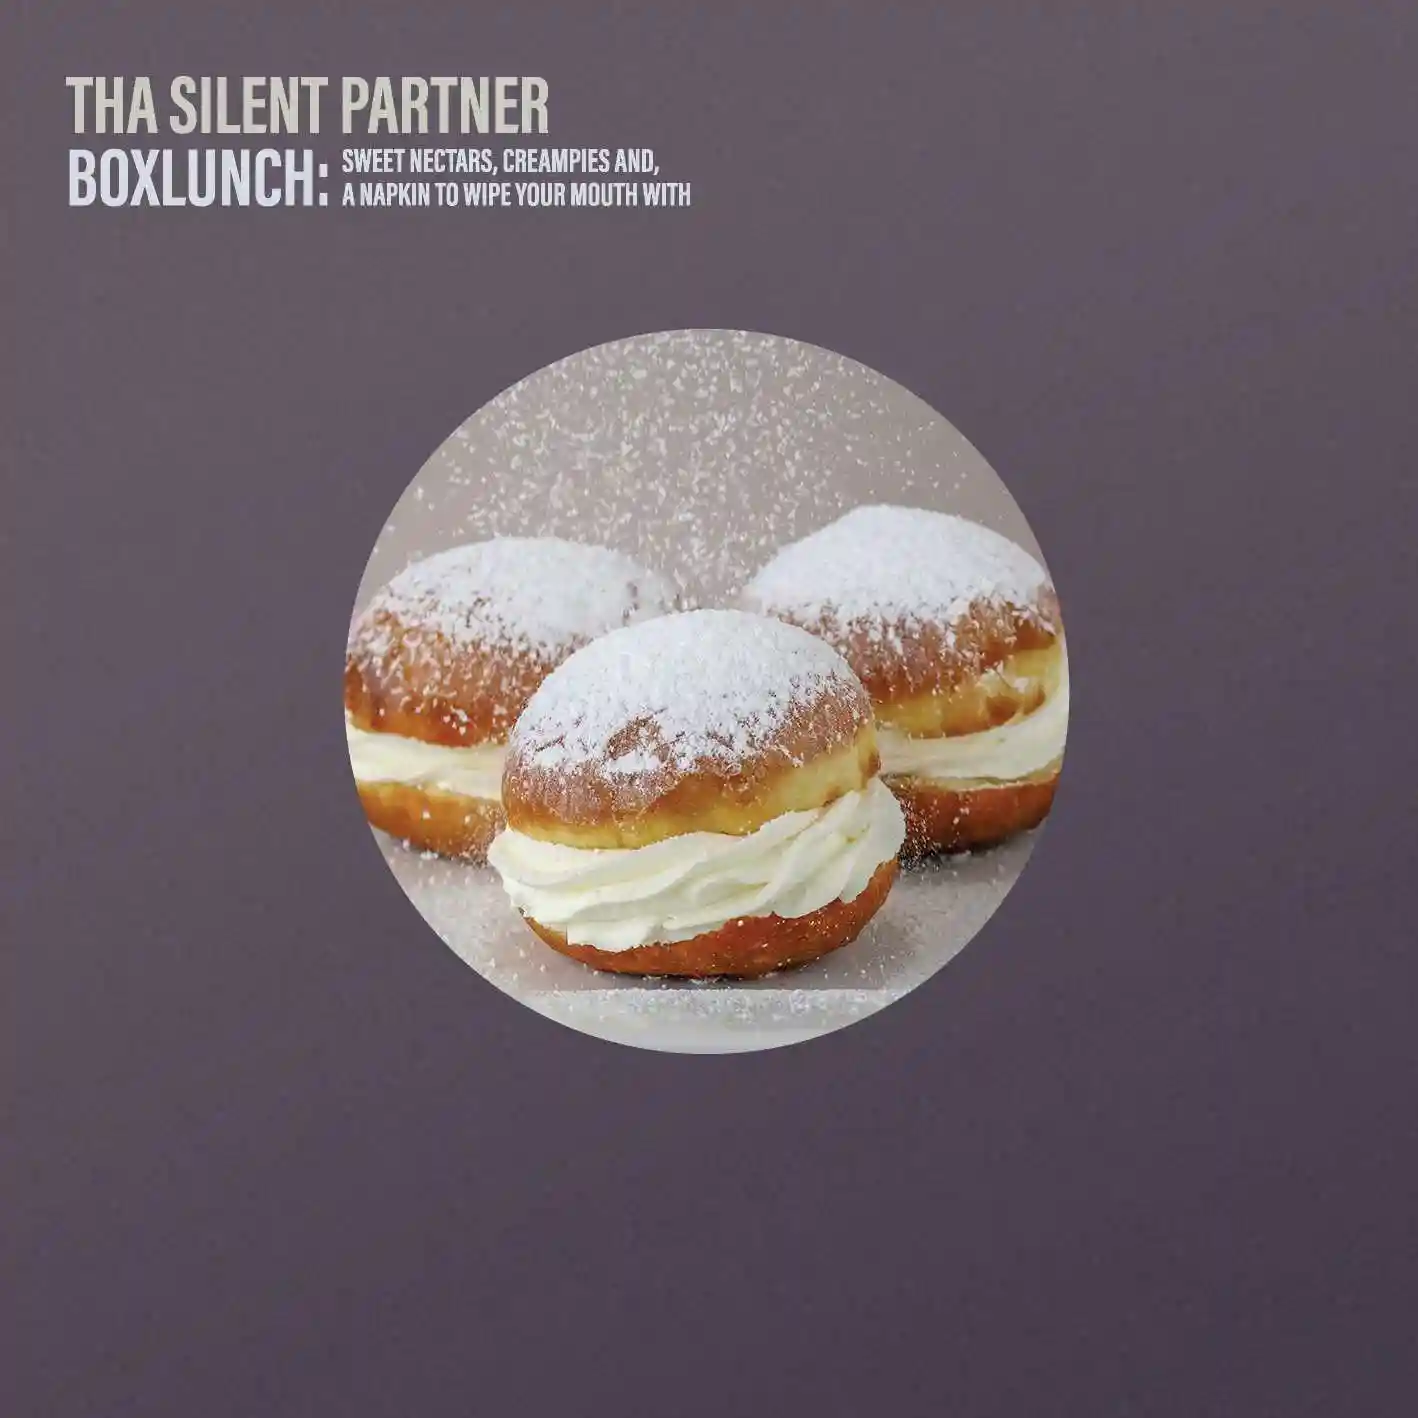 Album cover for “BOXLUNCH: Sweet Nectars, Creampies And, A Napkin To Wipe Your Mouth With” by Tha Silent Partner